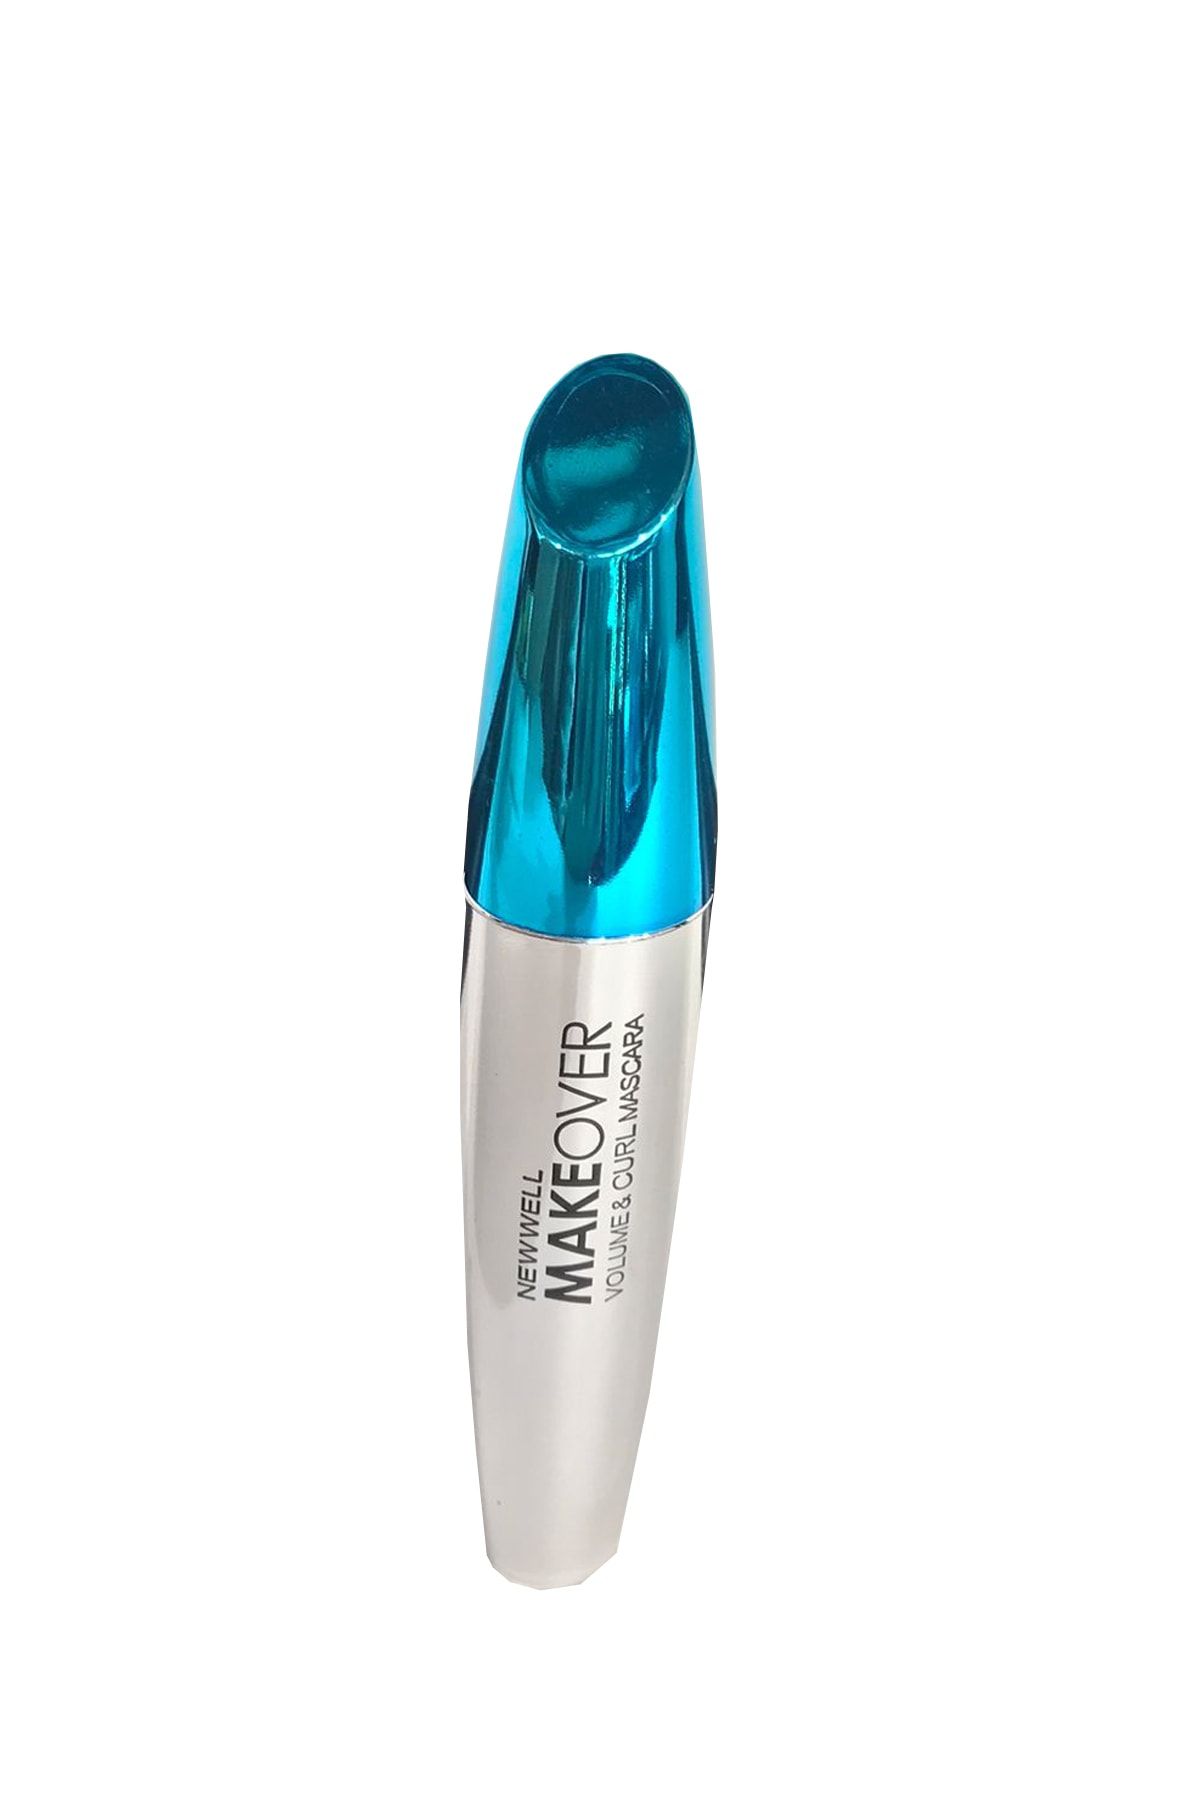 New Well Makeover Volume Curl Mascara